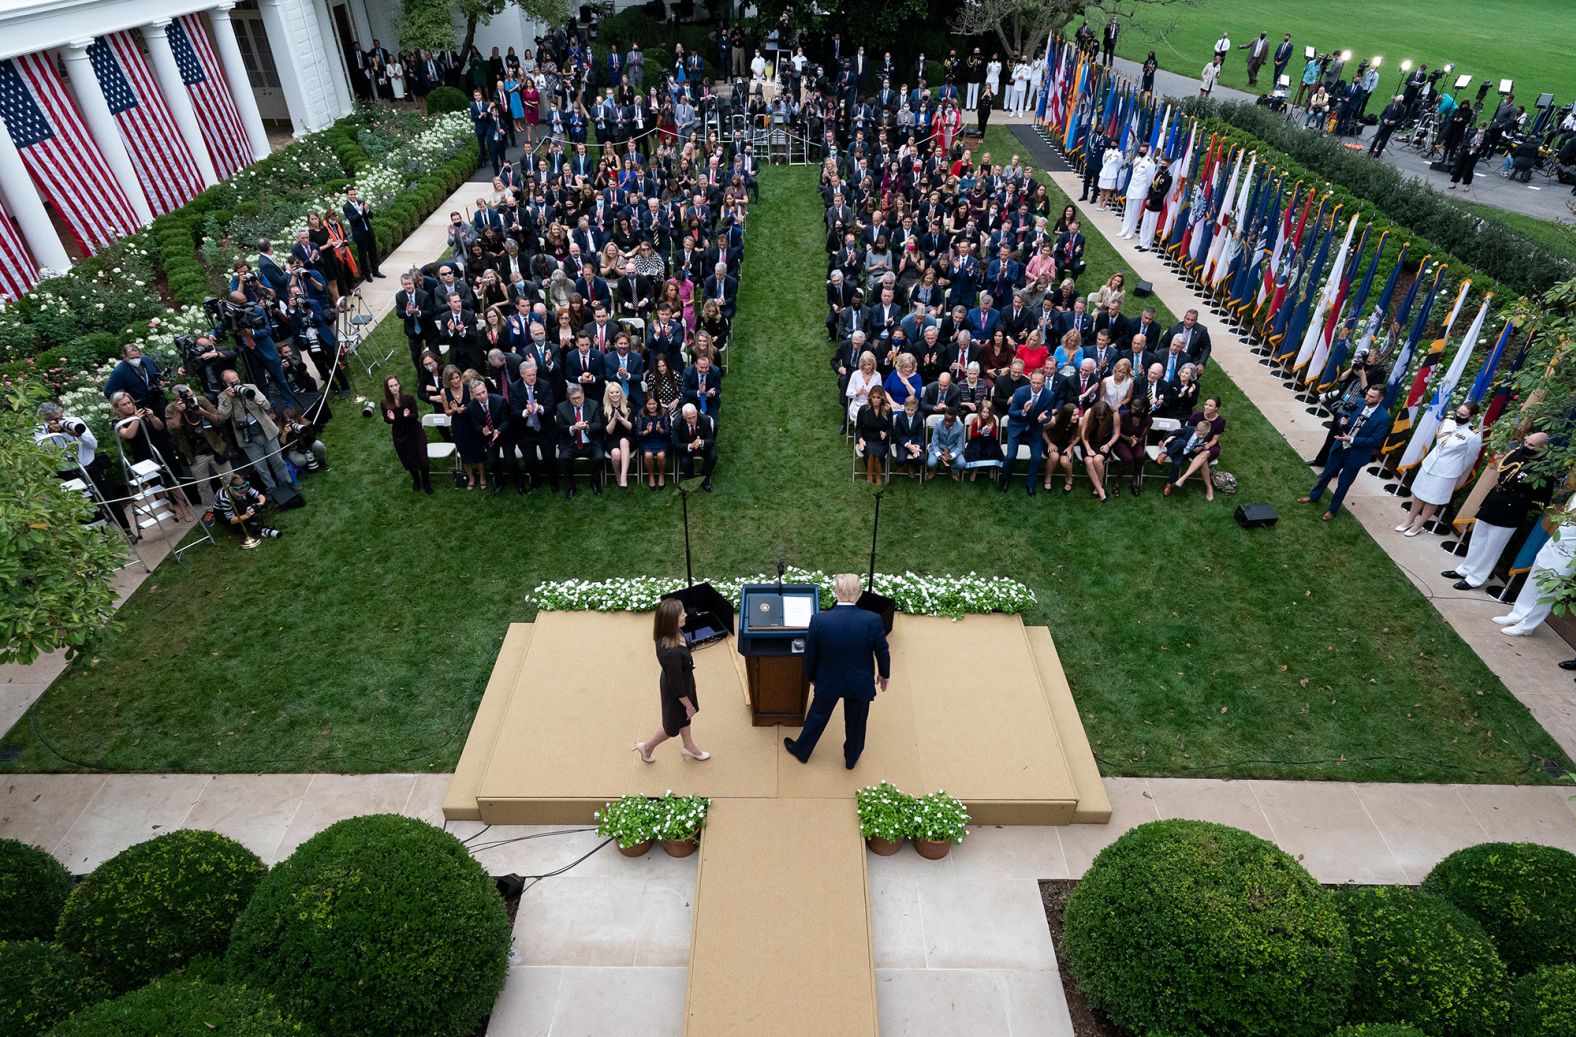 Barrett approaches the podium during the Rose Garden event on September 26. At least 12 people who attended the event — including President Trump — have since <a href="index.php?page=&url=https%3A%2F%2Fwww.cnn.com%2F2020%2F10%2F03%2Fpolitics%2Ftrump-covid-amy-coney-barrett-event%2Findex.html" target="_blank">tested positive for coronavirus.</a>